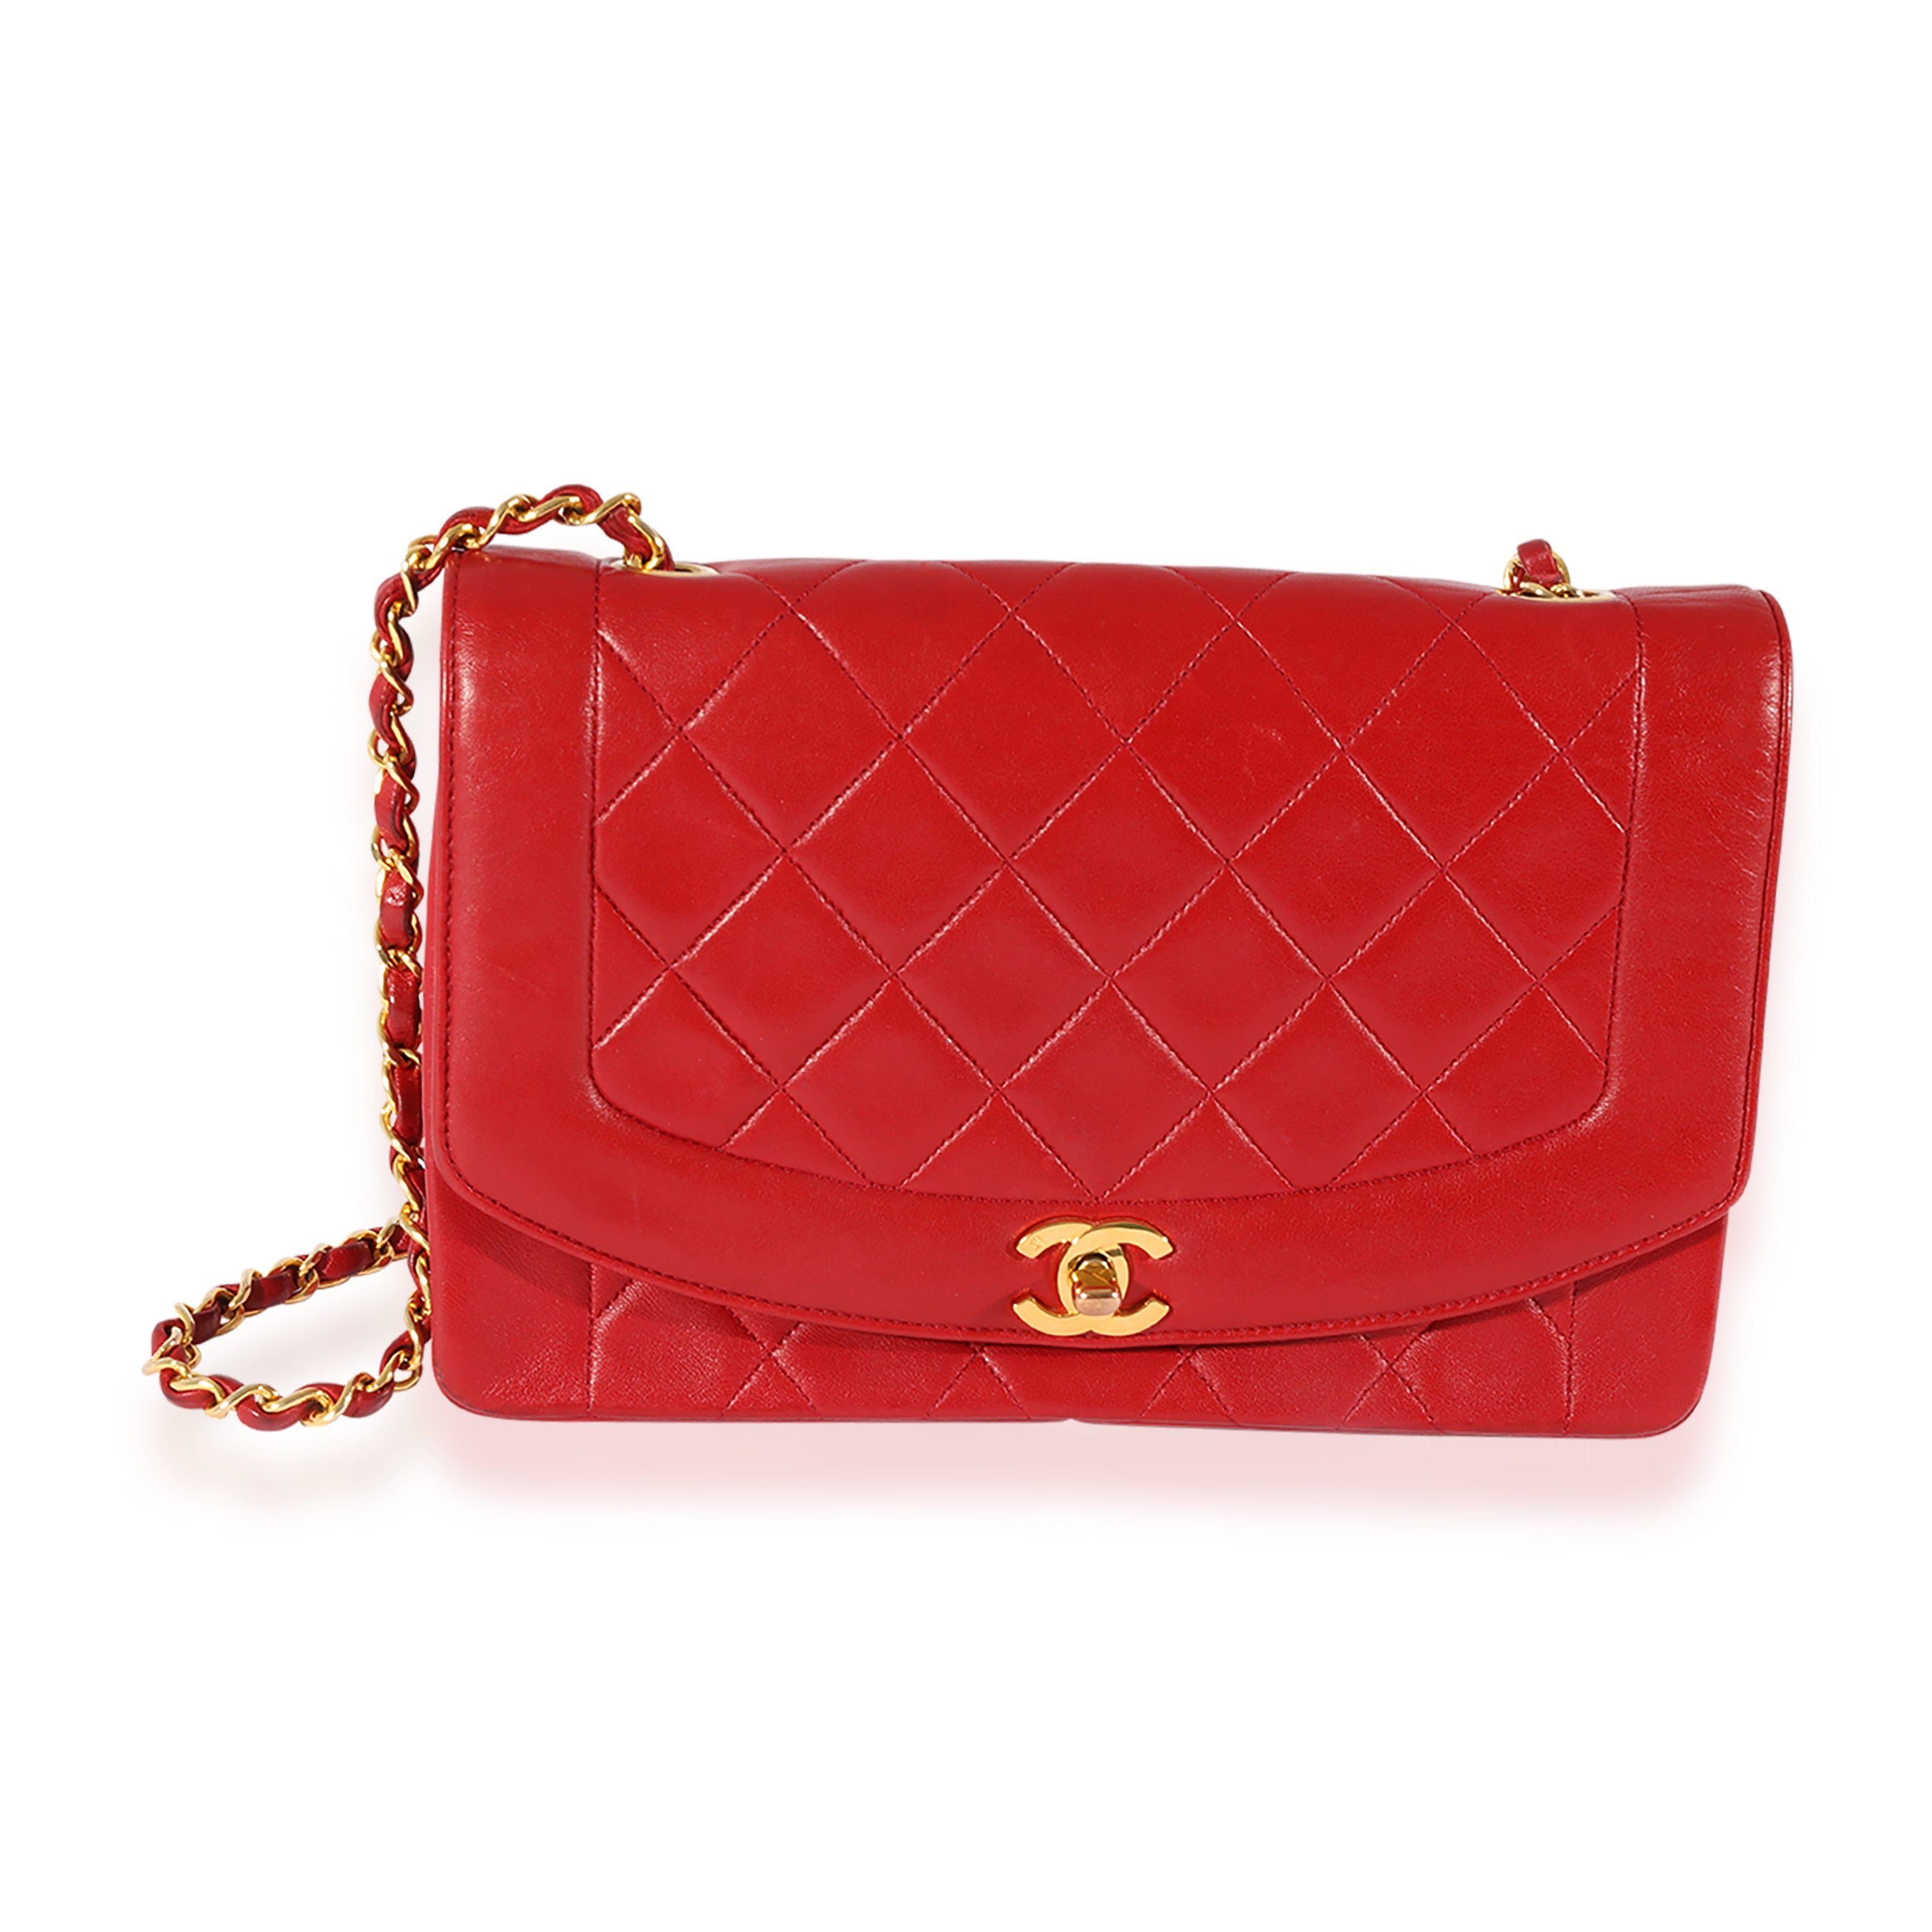 Chanel Vintage Red Quilted Lambskin Diana Flap Bag, myGemma